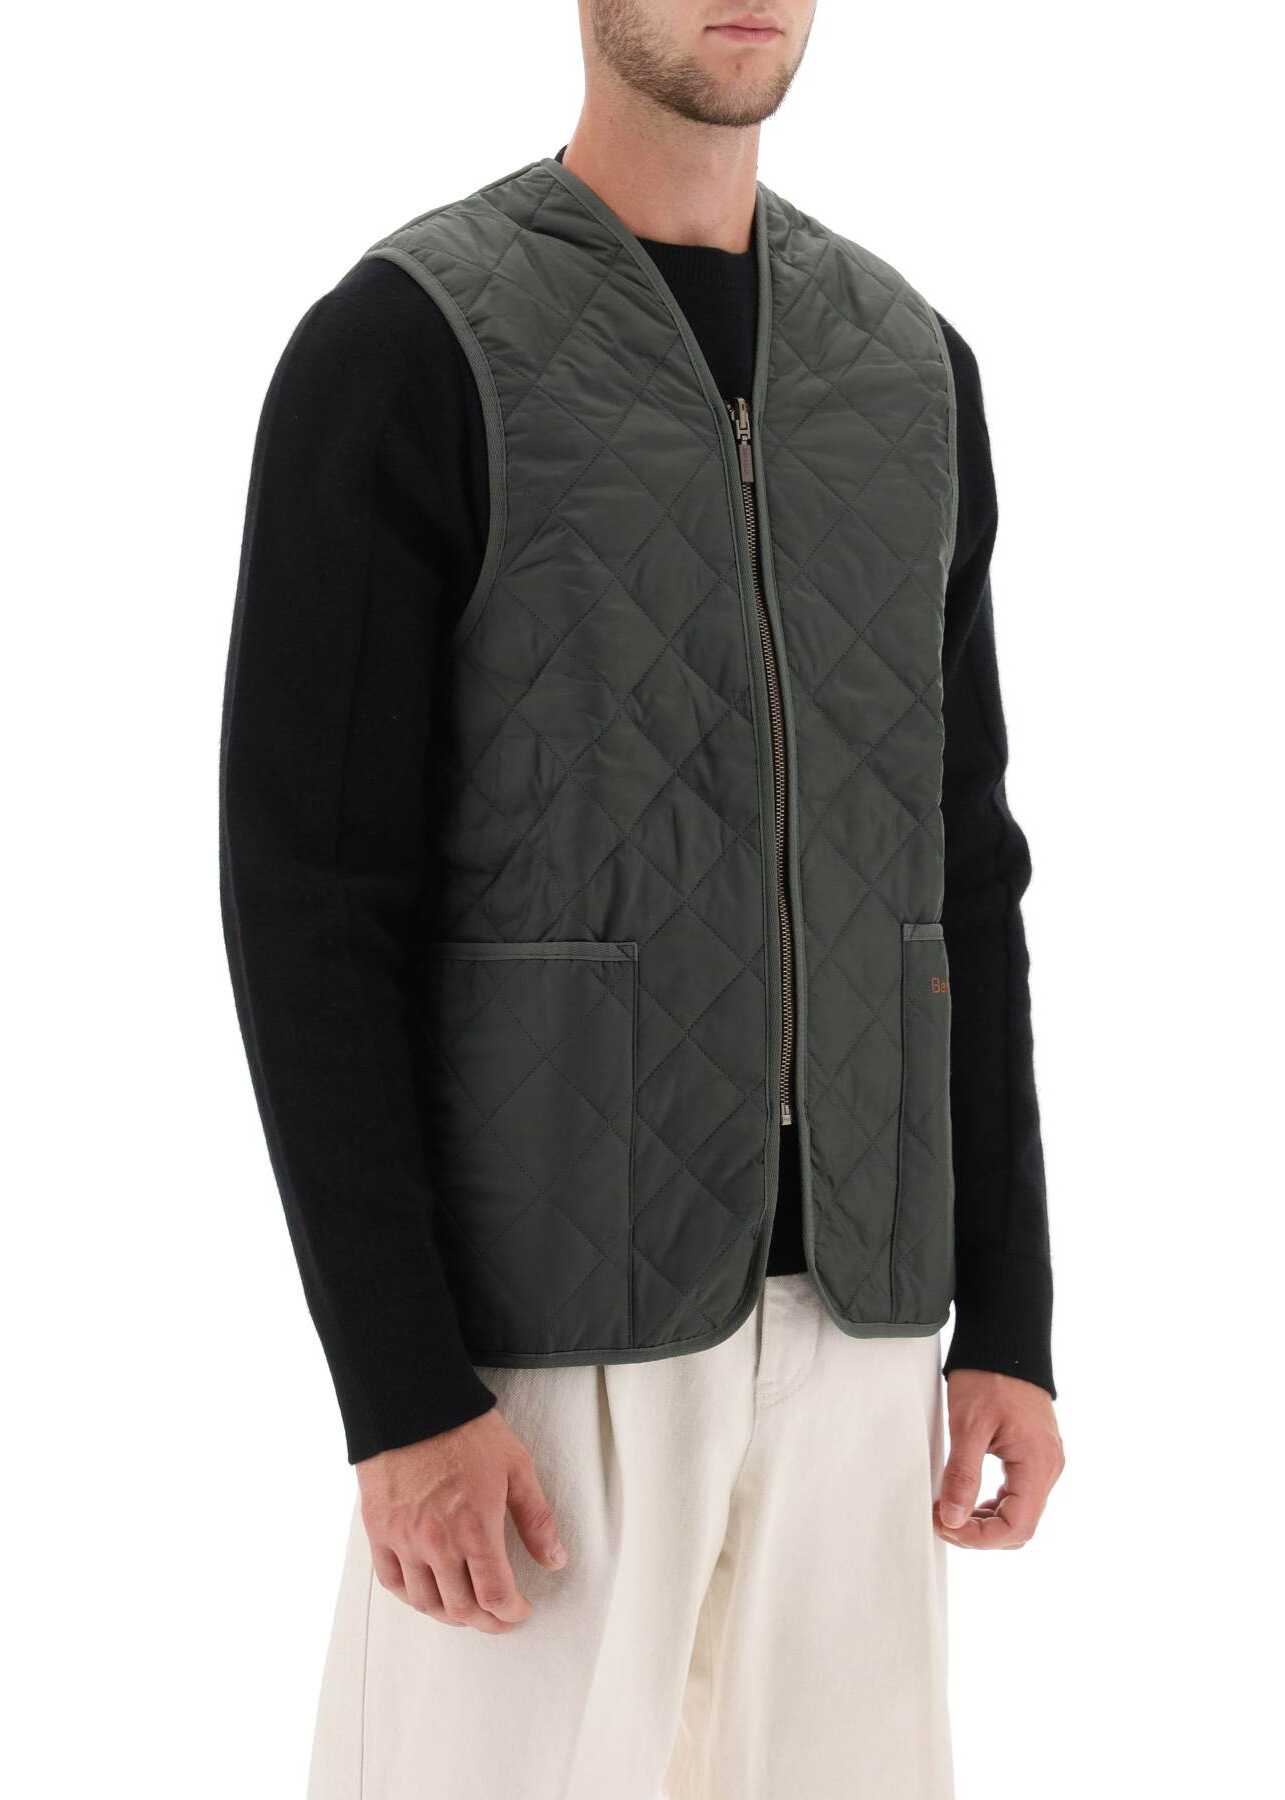 Barbour Quilted Vest OLIVE CLASSIC b-mall.ro